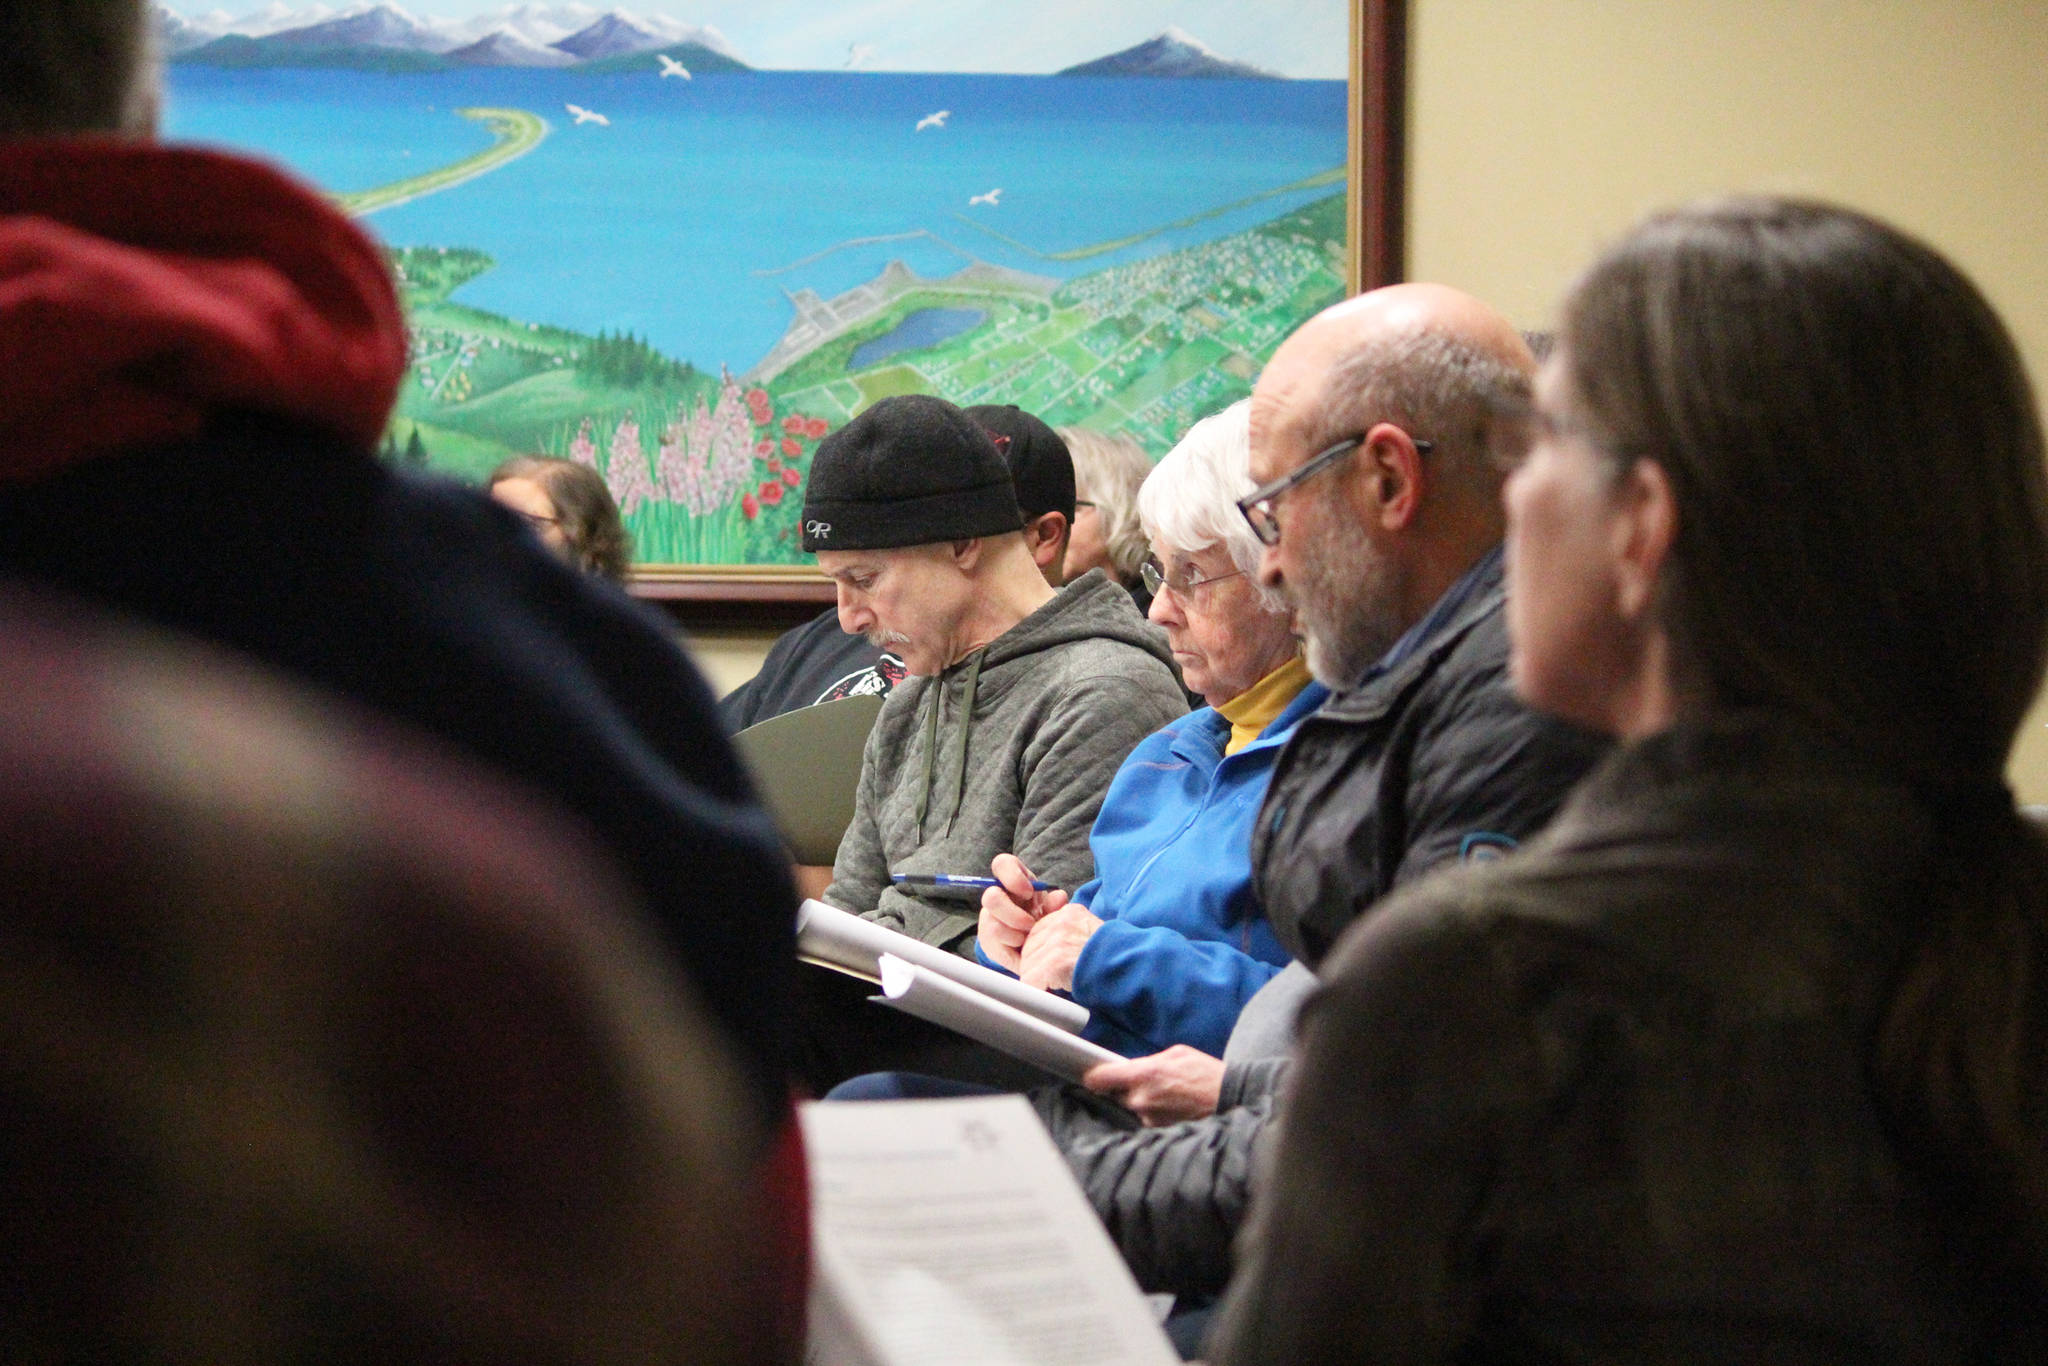 Members of the public listen during a Tuesday, Jan. 22, 2019 community meeting to discuss task force recommendations on the Homer Education and Recreation Complex, held at City Hall in Homer, Alaska. (Photo by Megan Pacer/Homer News)